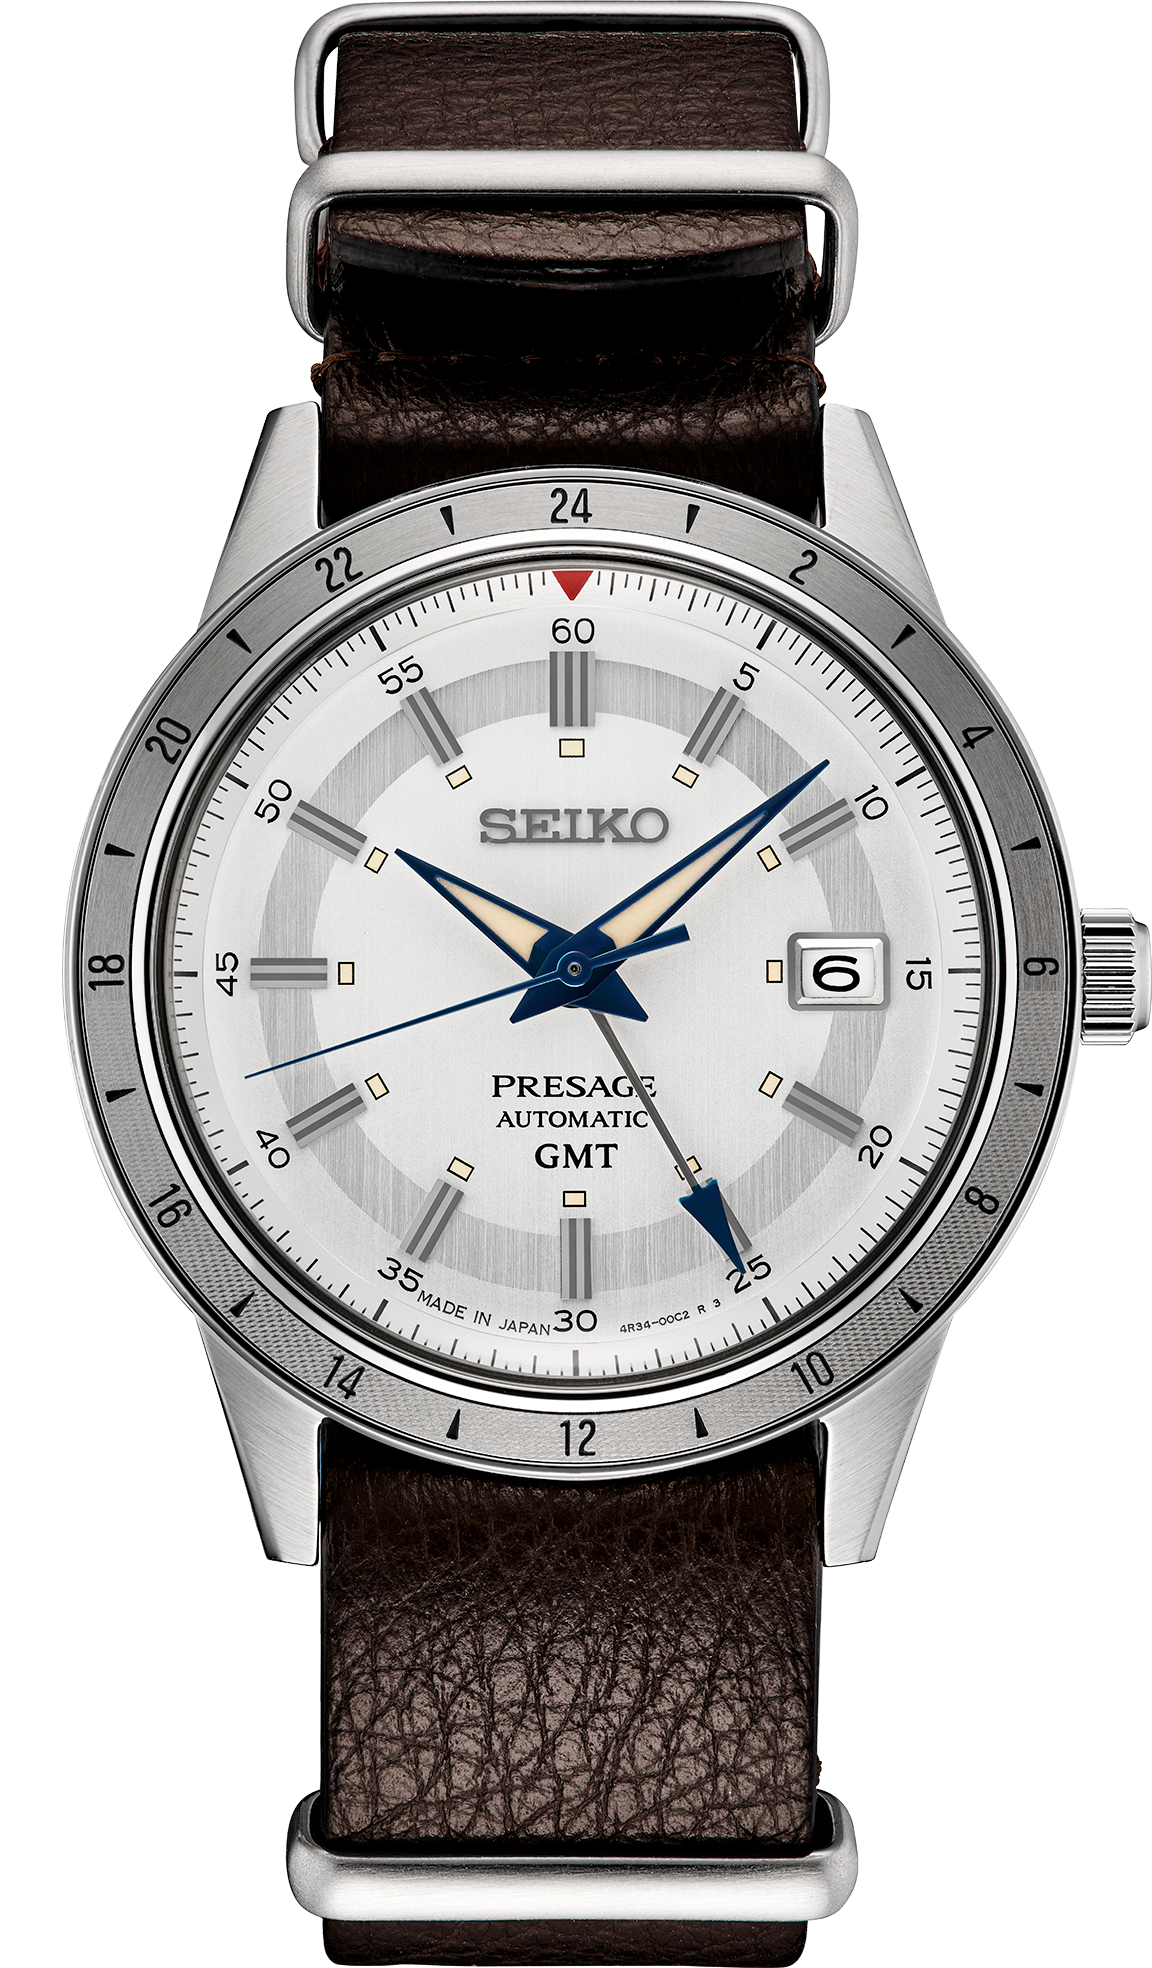 Seiko Watchmaking 110th Anniversary Limited Edition